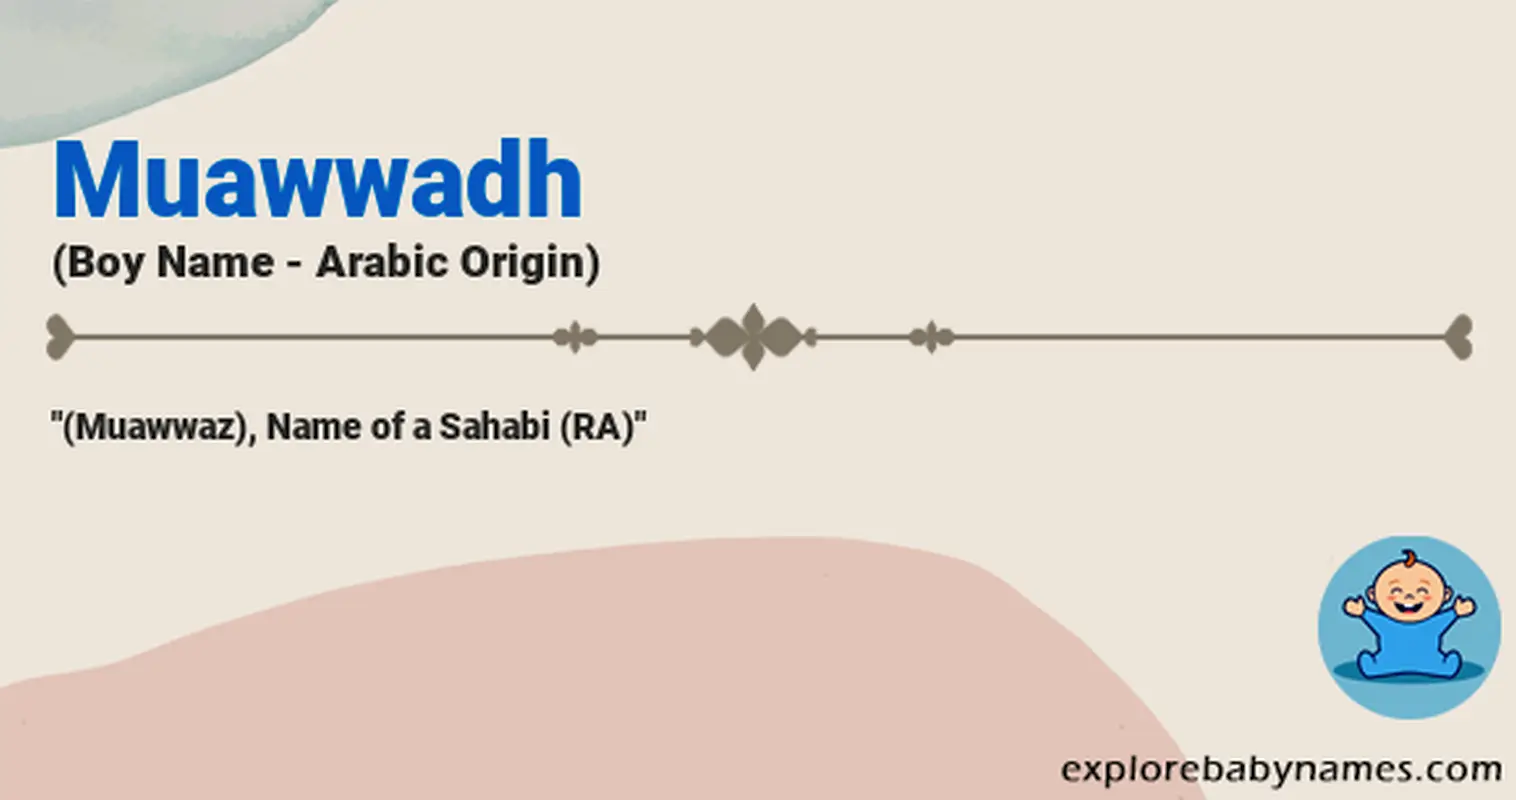 Meaning of Muawwadh